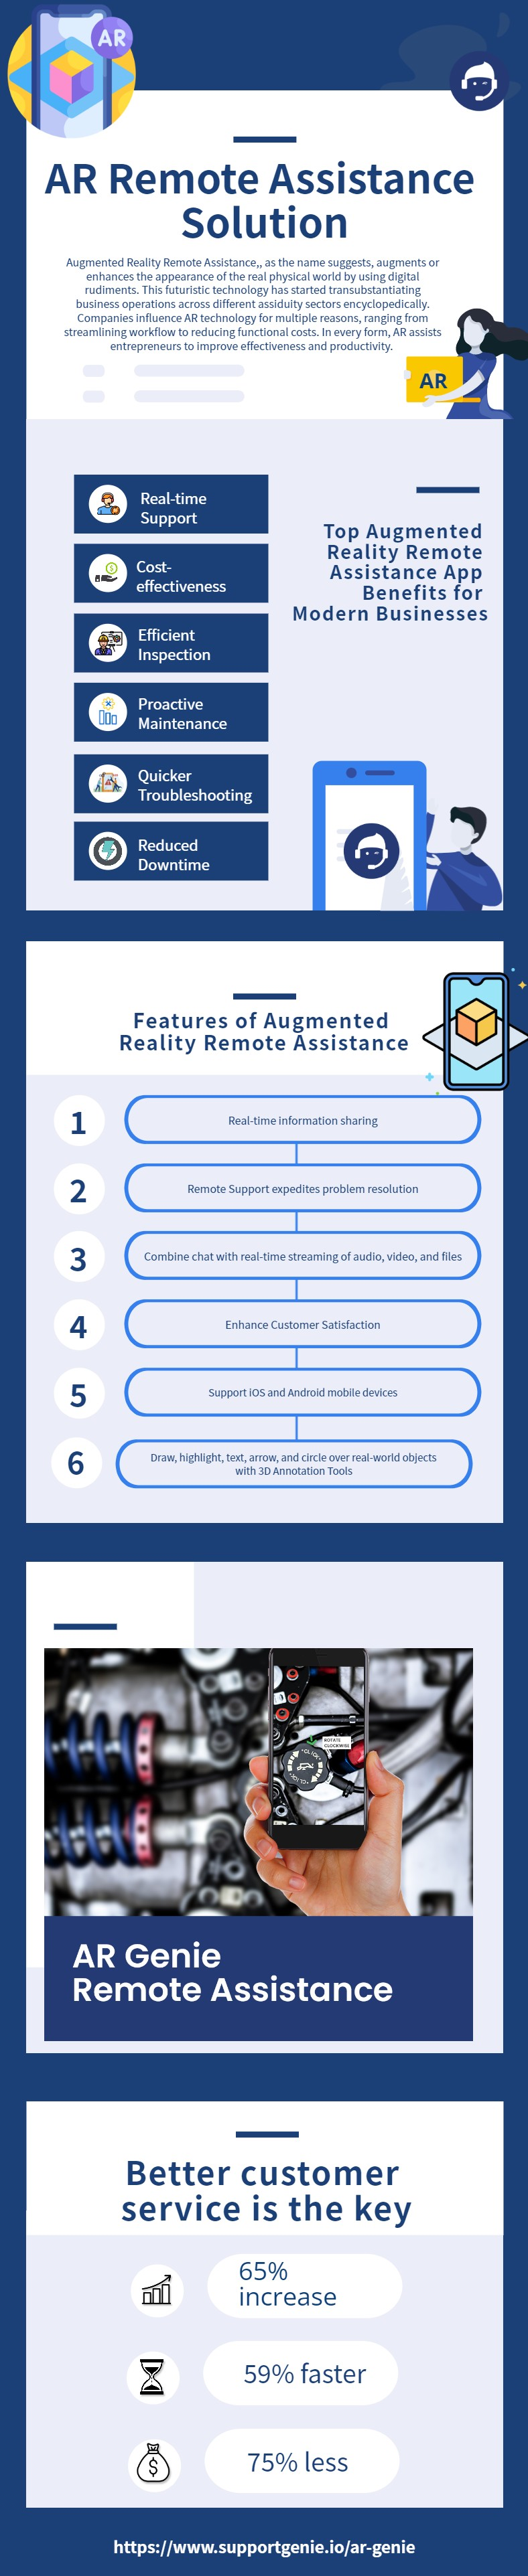 AR Remote Assistance Solution